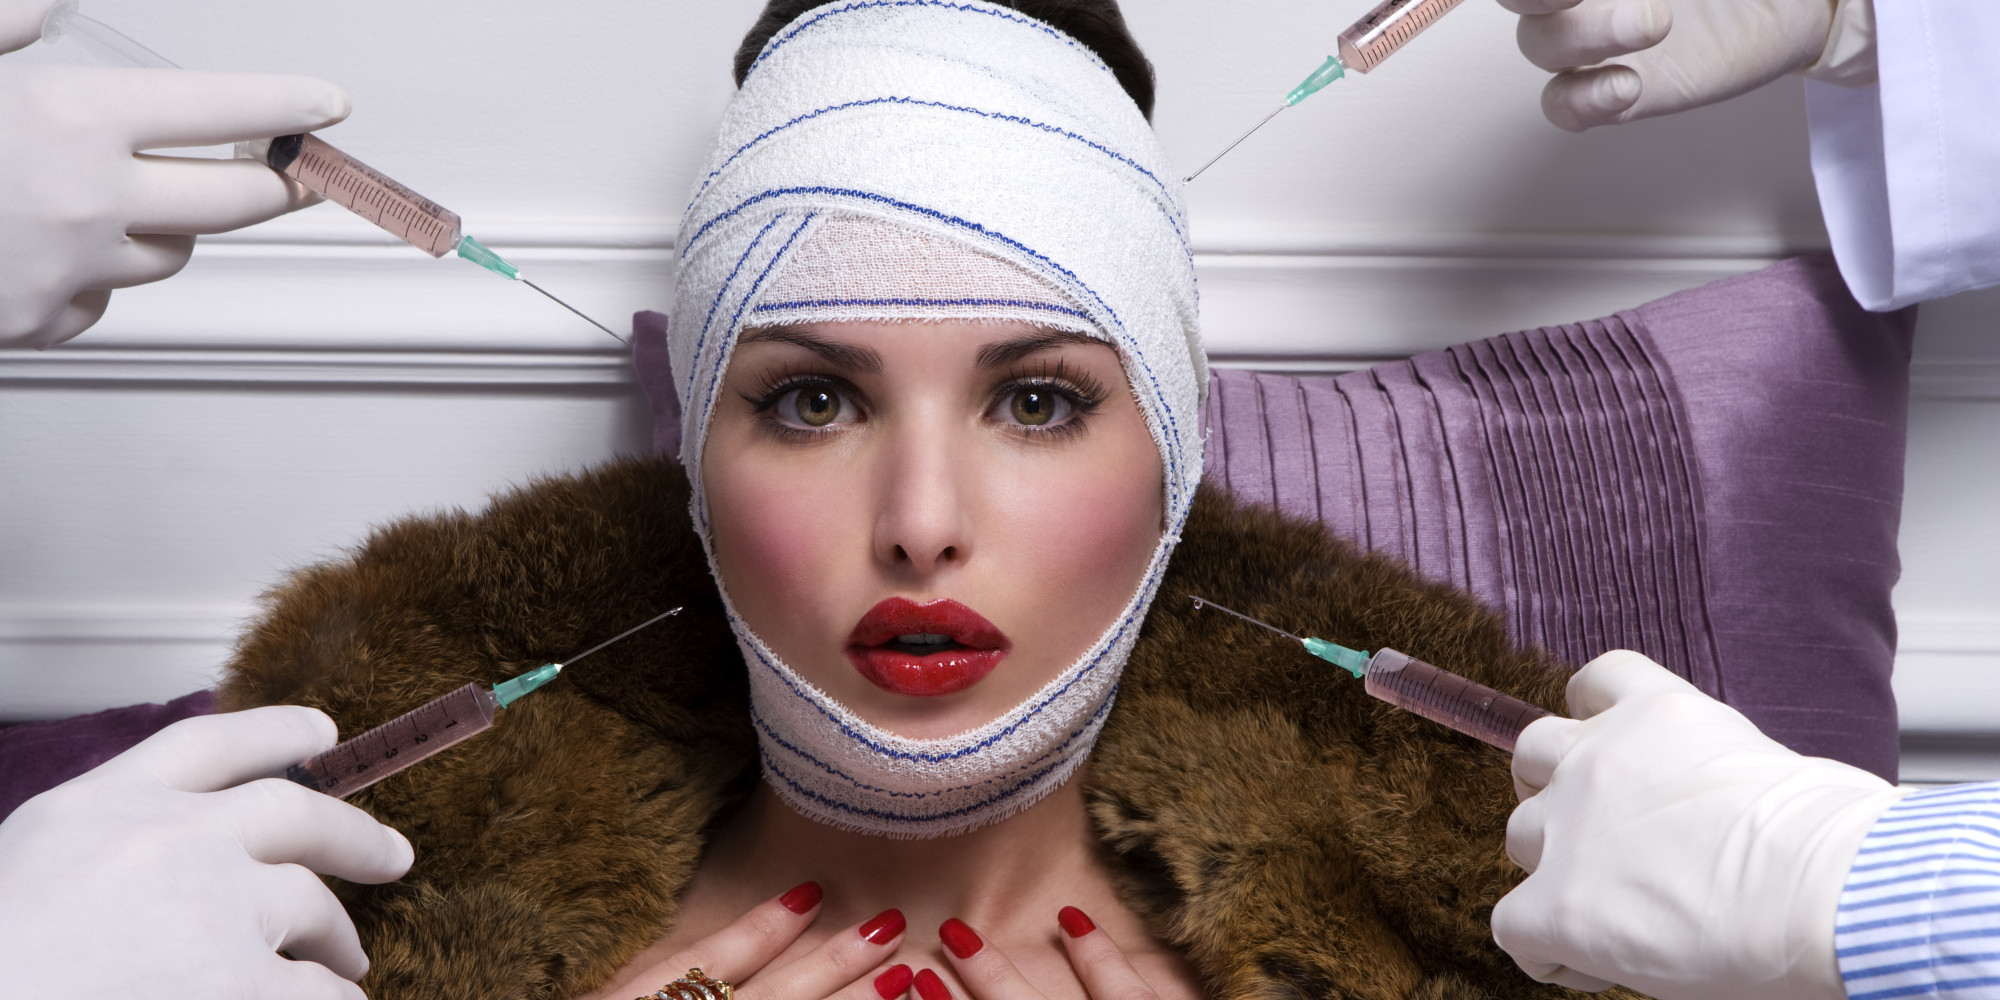 The Cosmetic Surgery Trends Of Australia